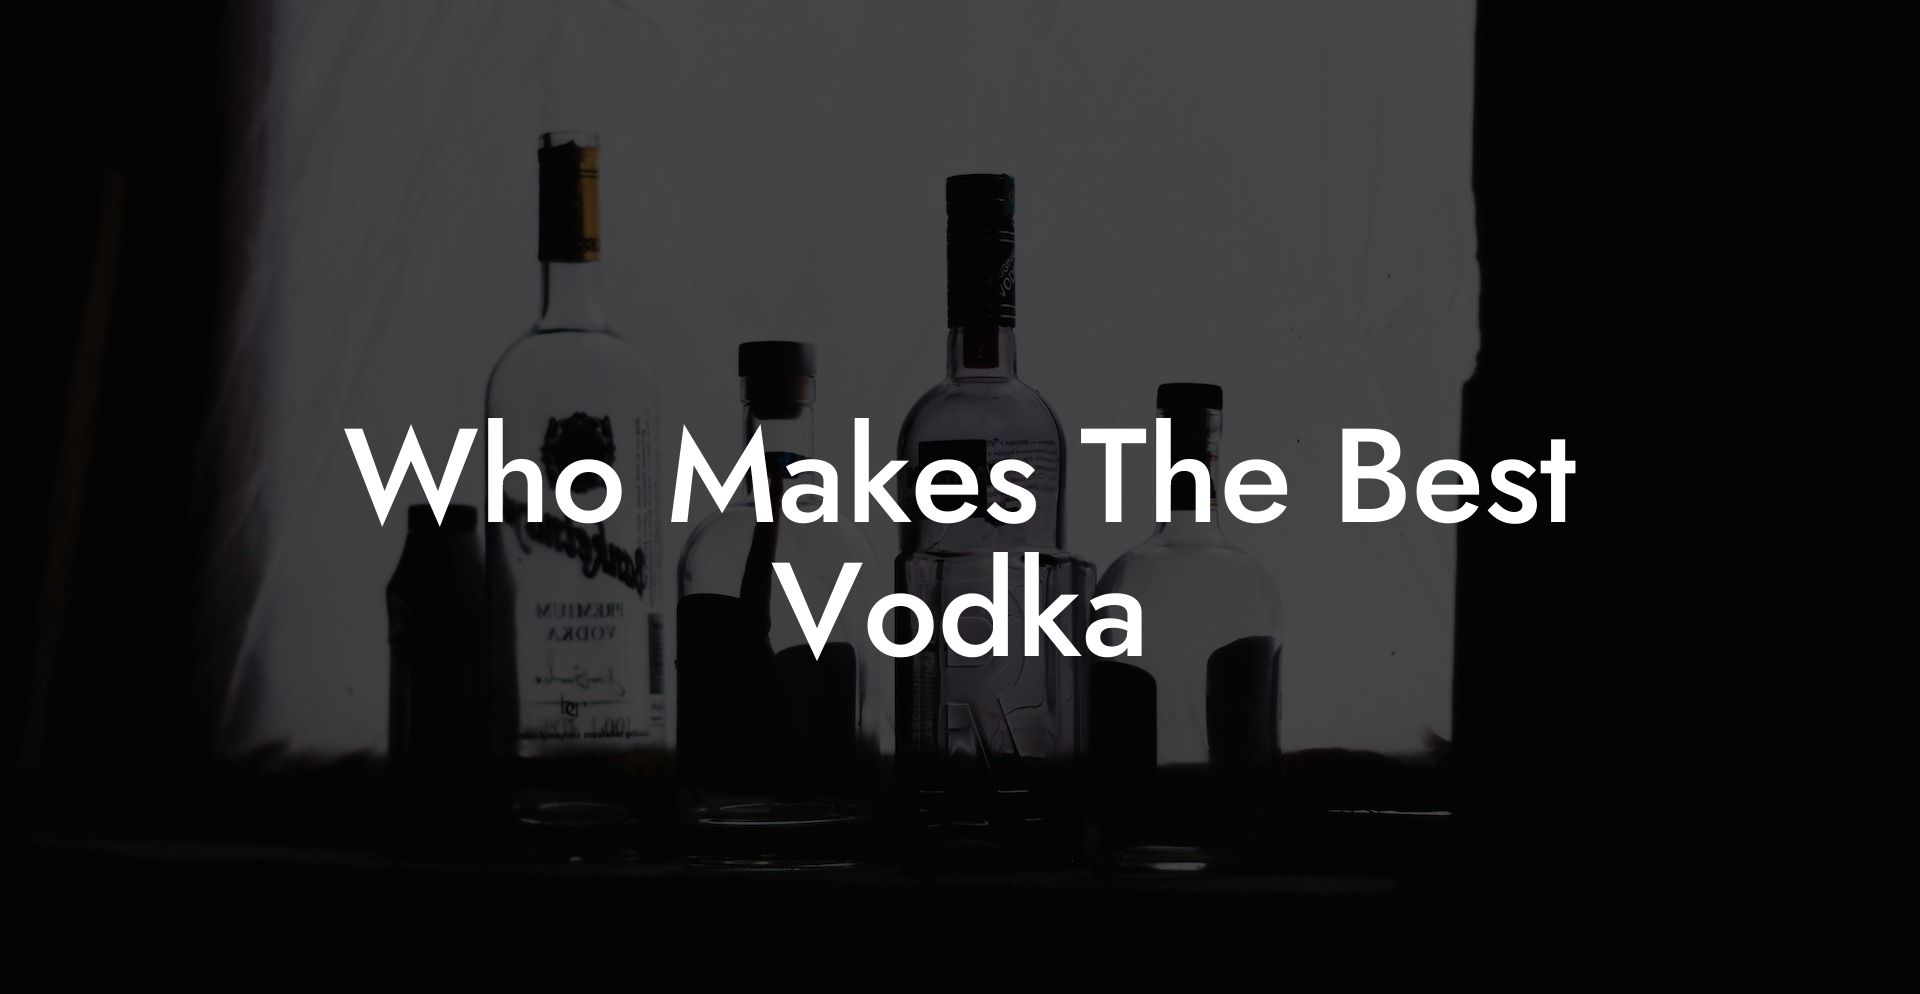 Who Makes The Best Vodka